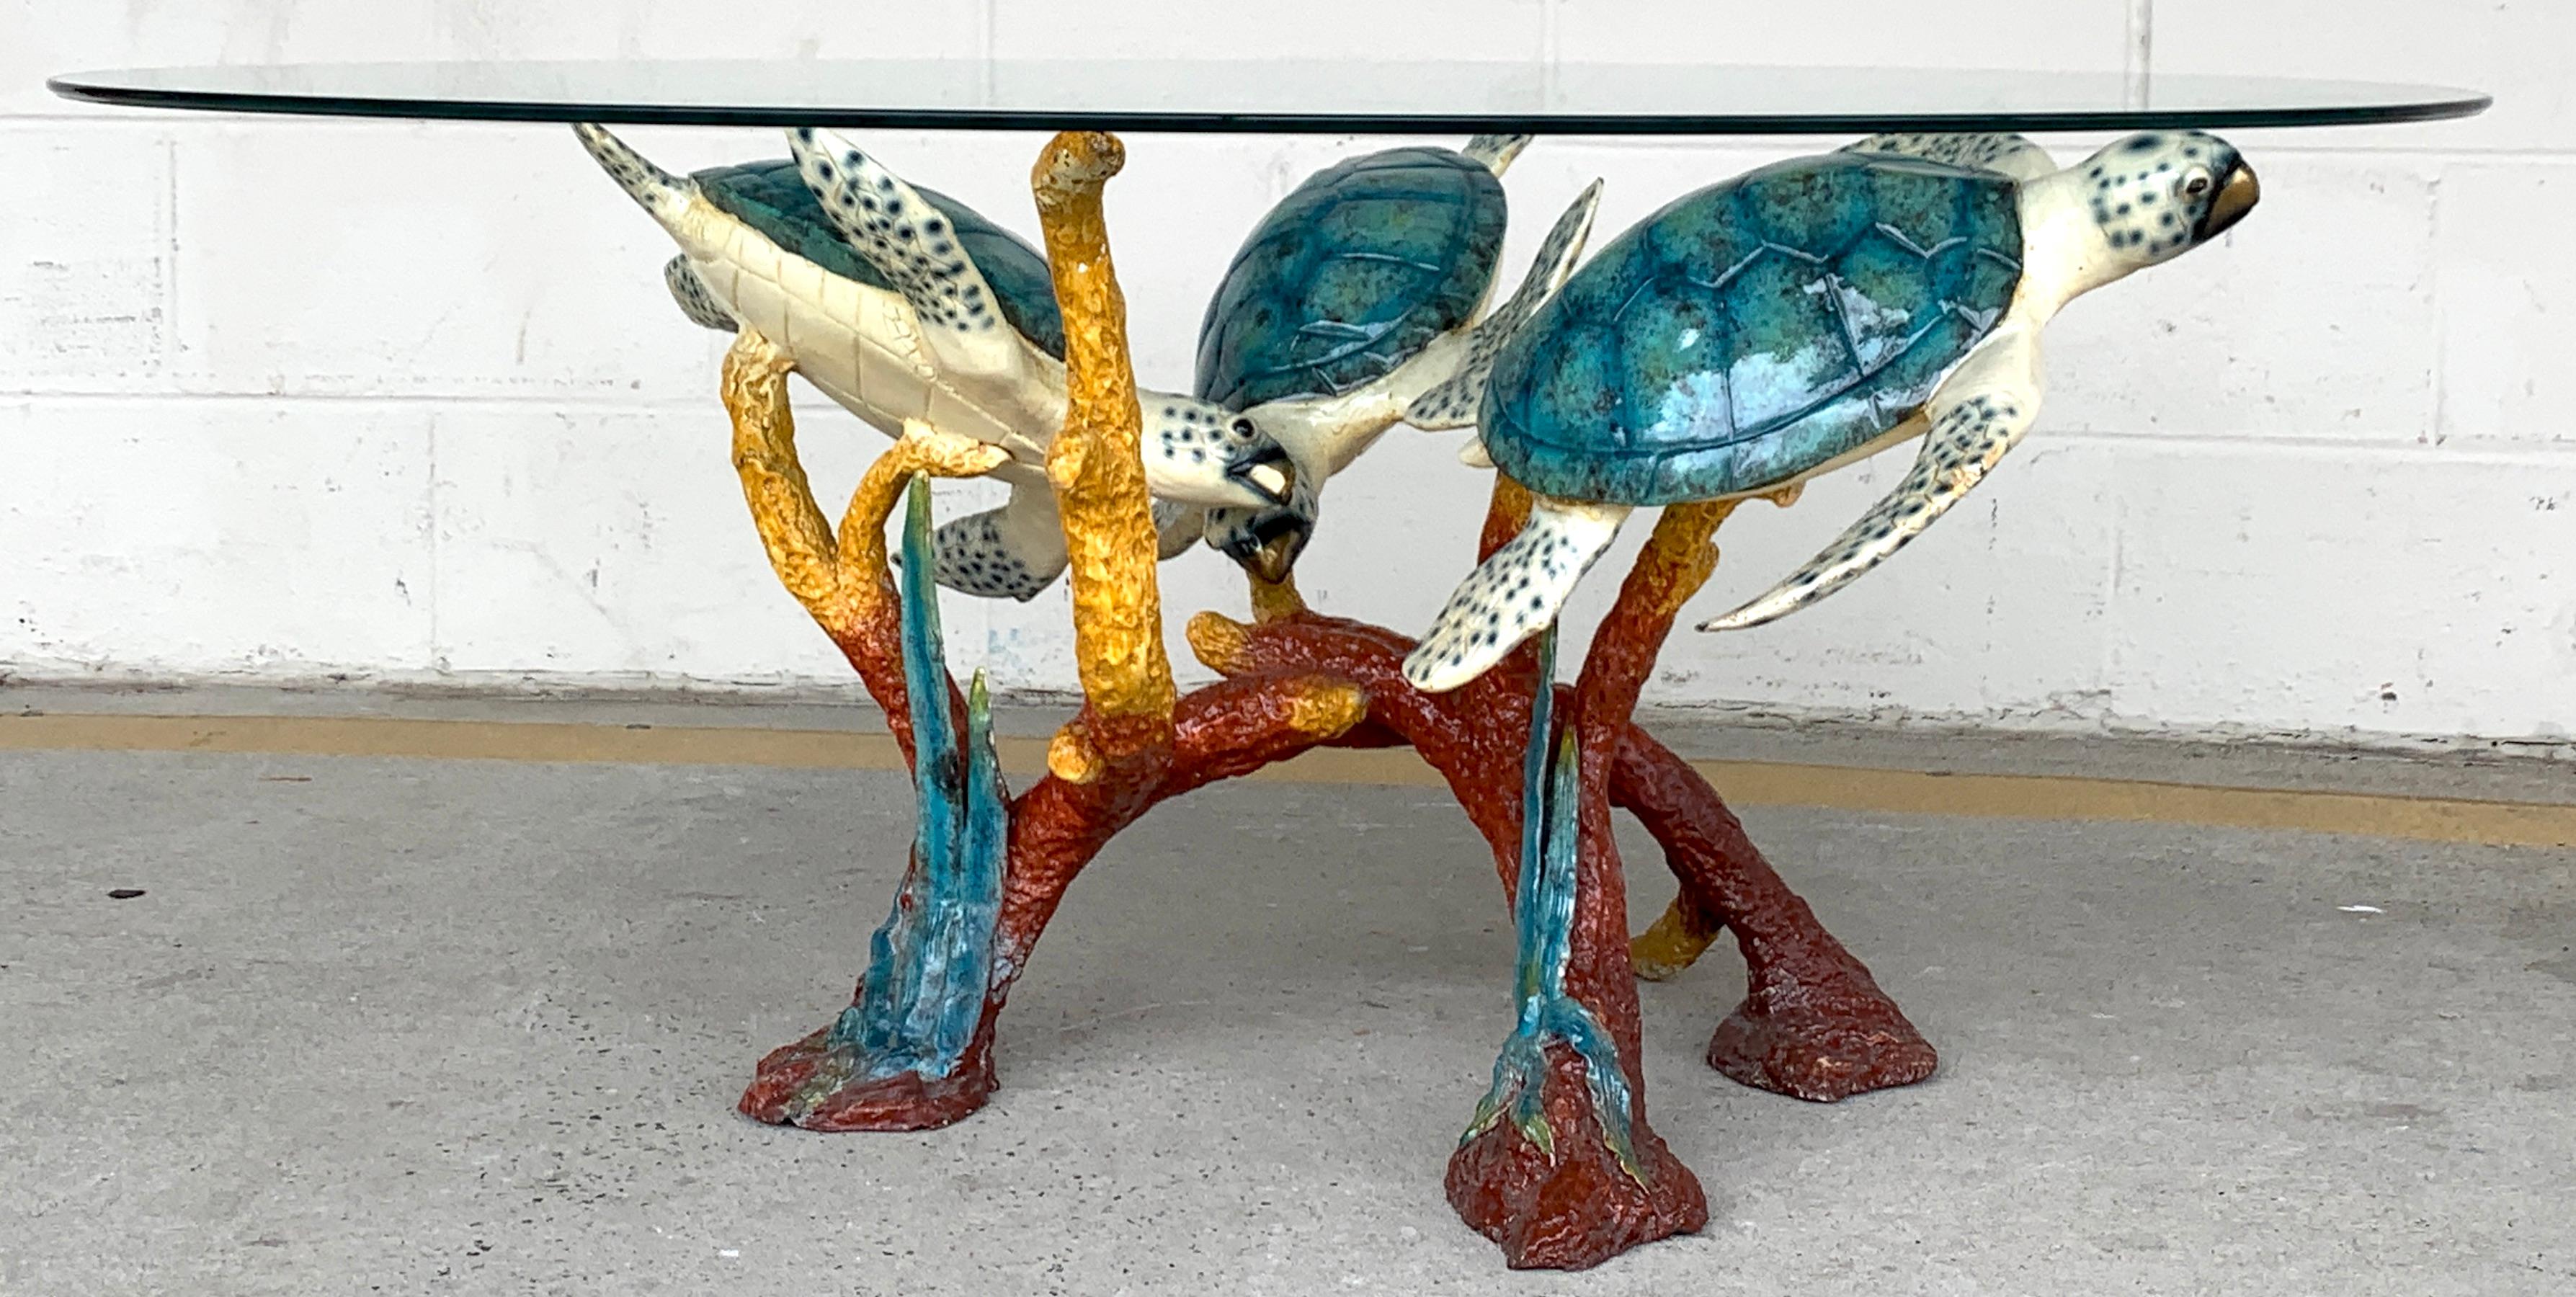 Enameled bronze sea turtle coffee table, realistically cast and modeled, vibrant enamel decoration. A fascinating table. The sculpture itself measures 31